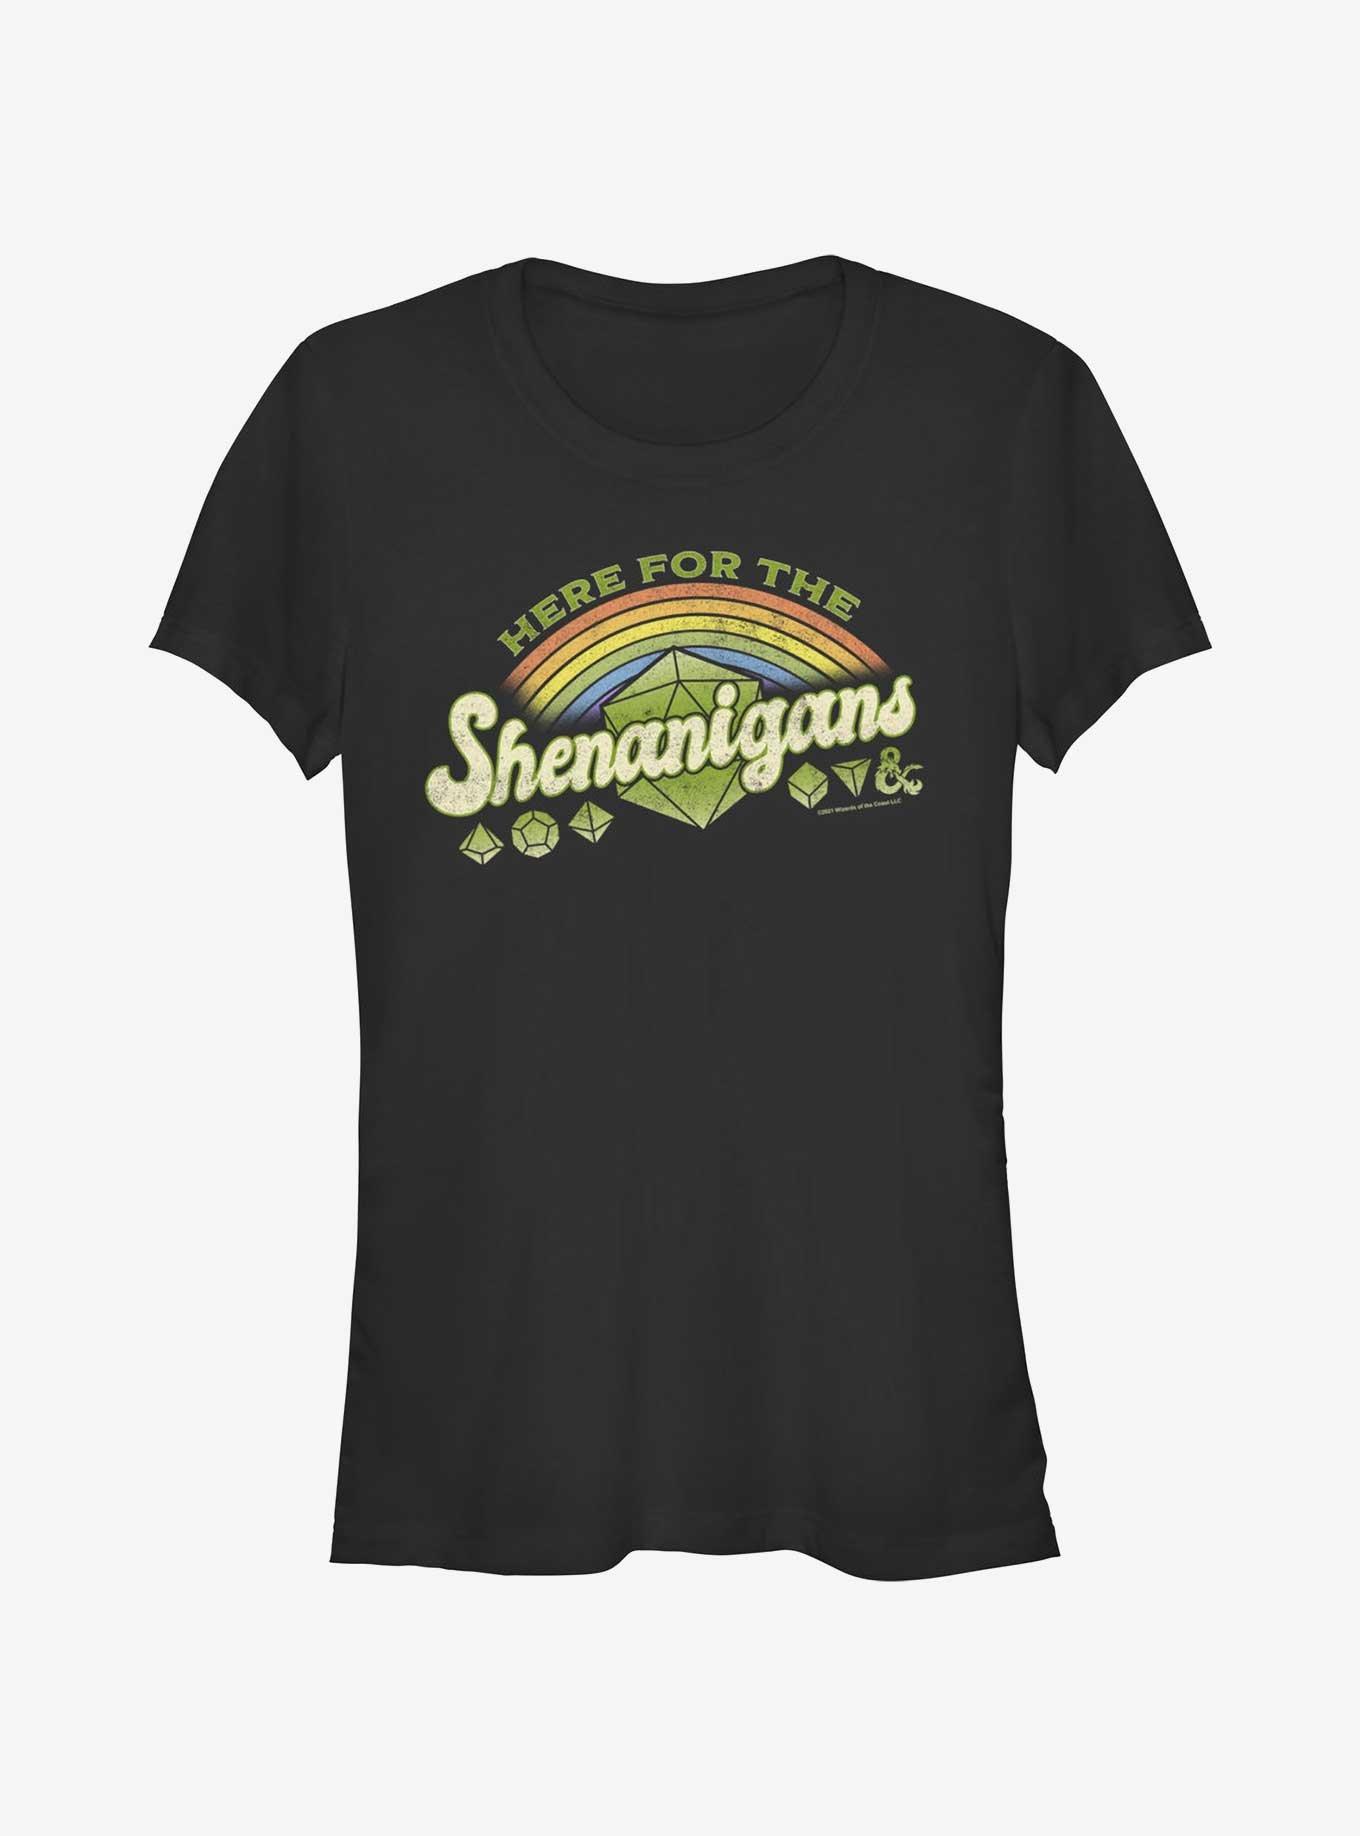 Dungeons And Dragons Here For Shenanigans Girls T-Shirt, BLACK, hi-res